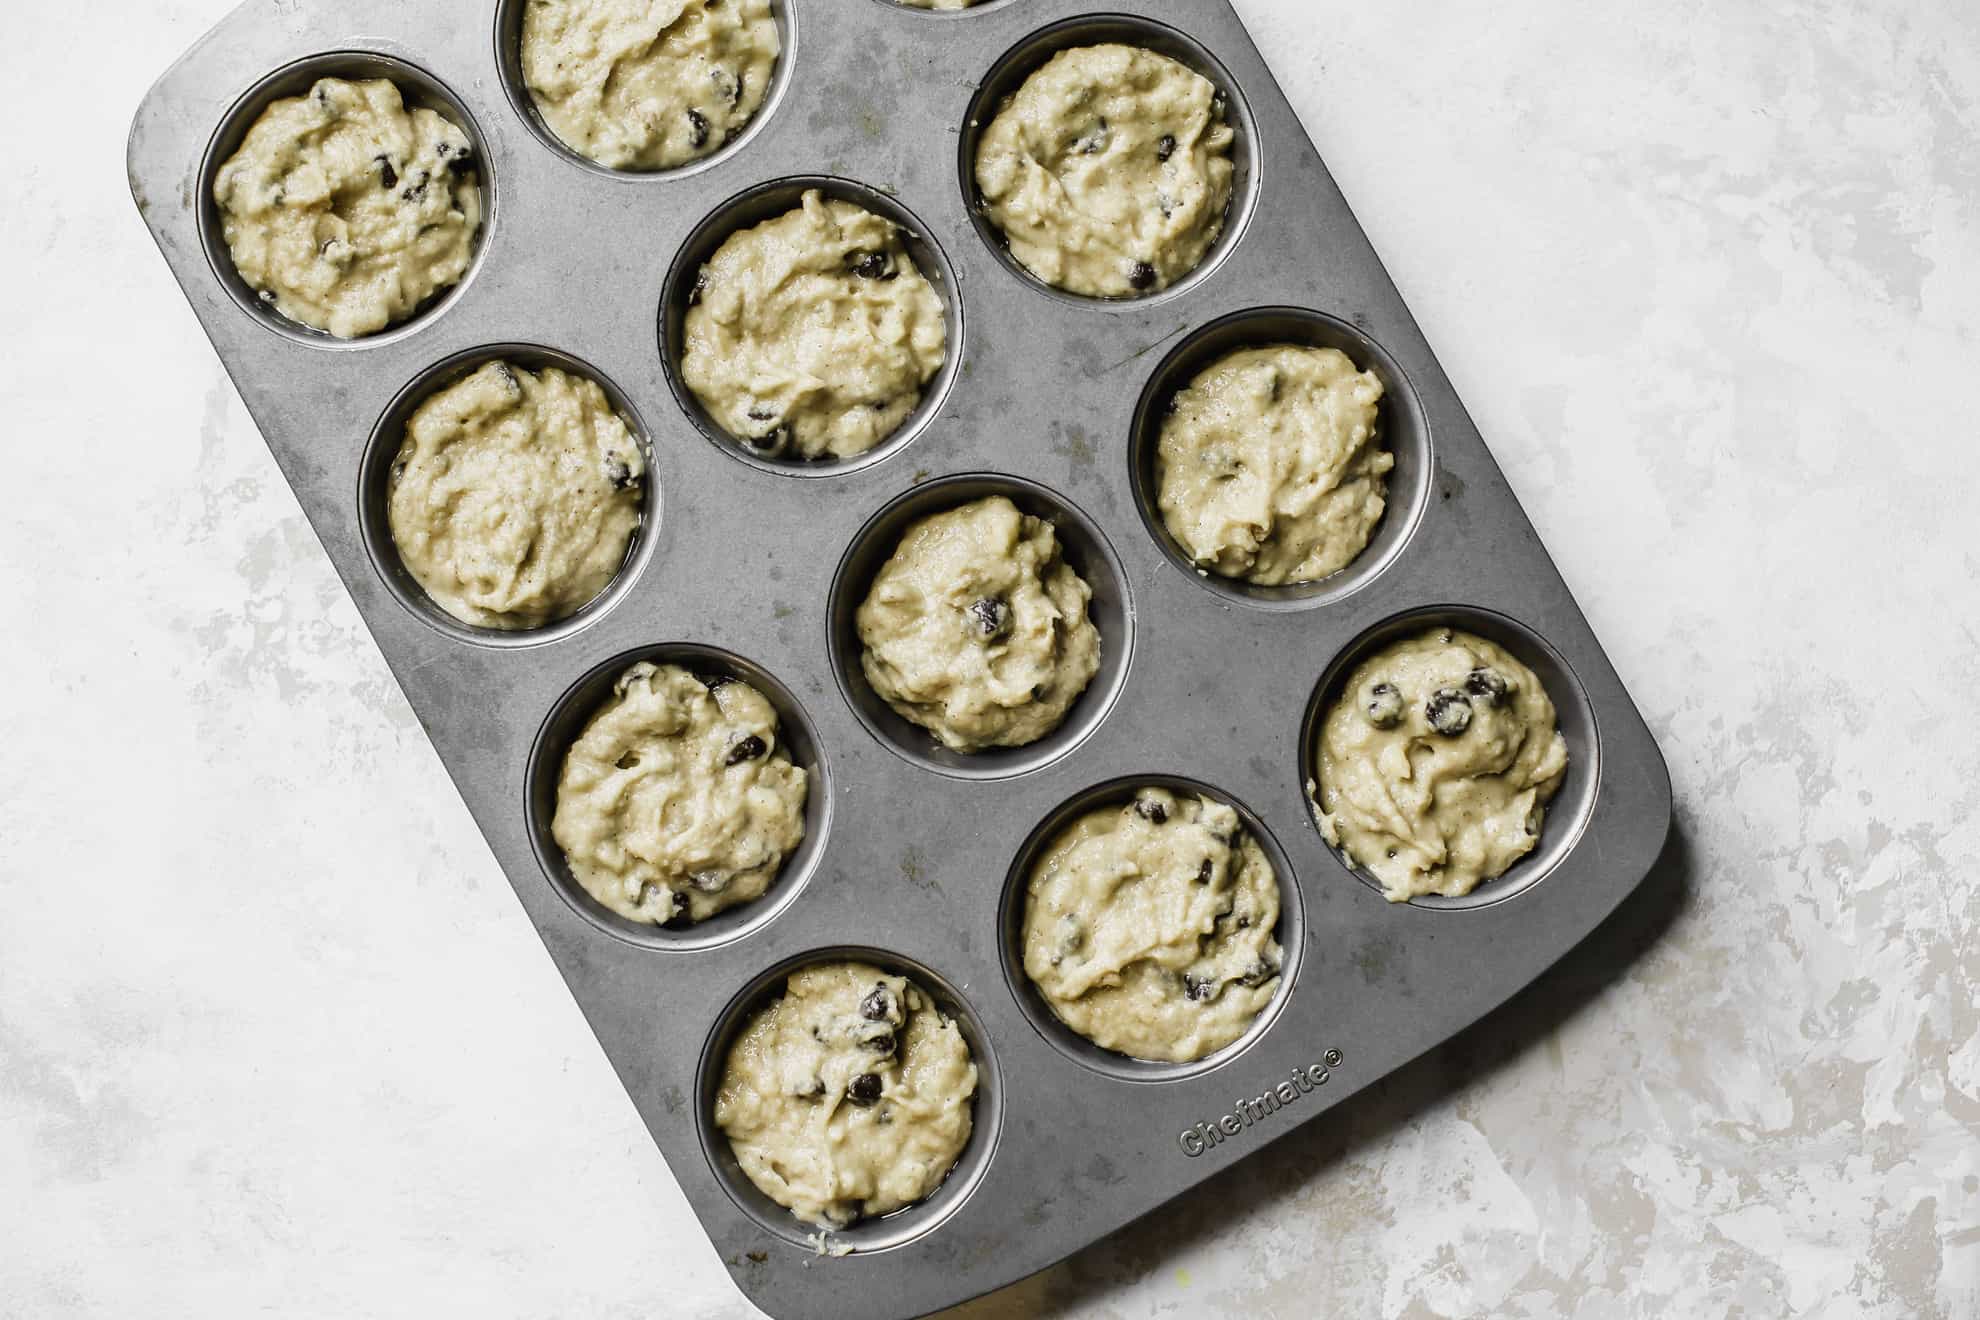 This is an overhead image of a muffin tin with raw batter inside. The muffin tin sits on a white and grey surface. Inside the tin is a raw, tan batter with some chocolate chops visible. 